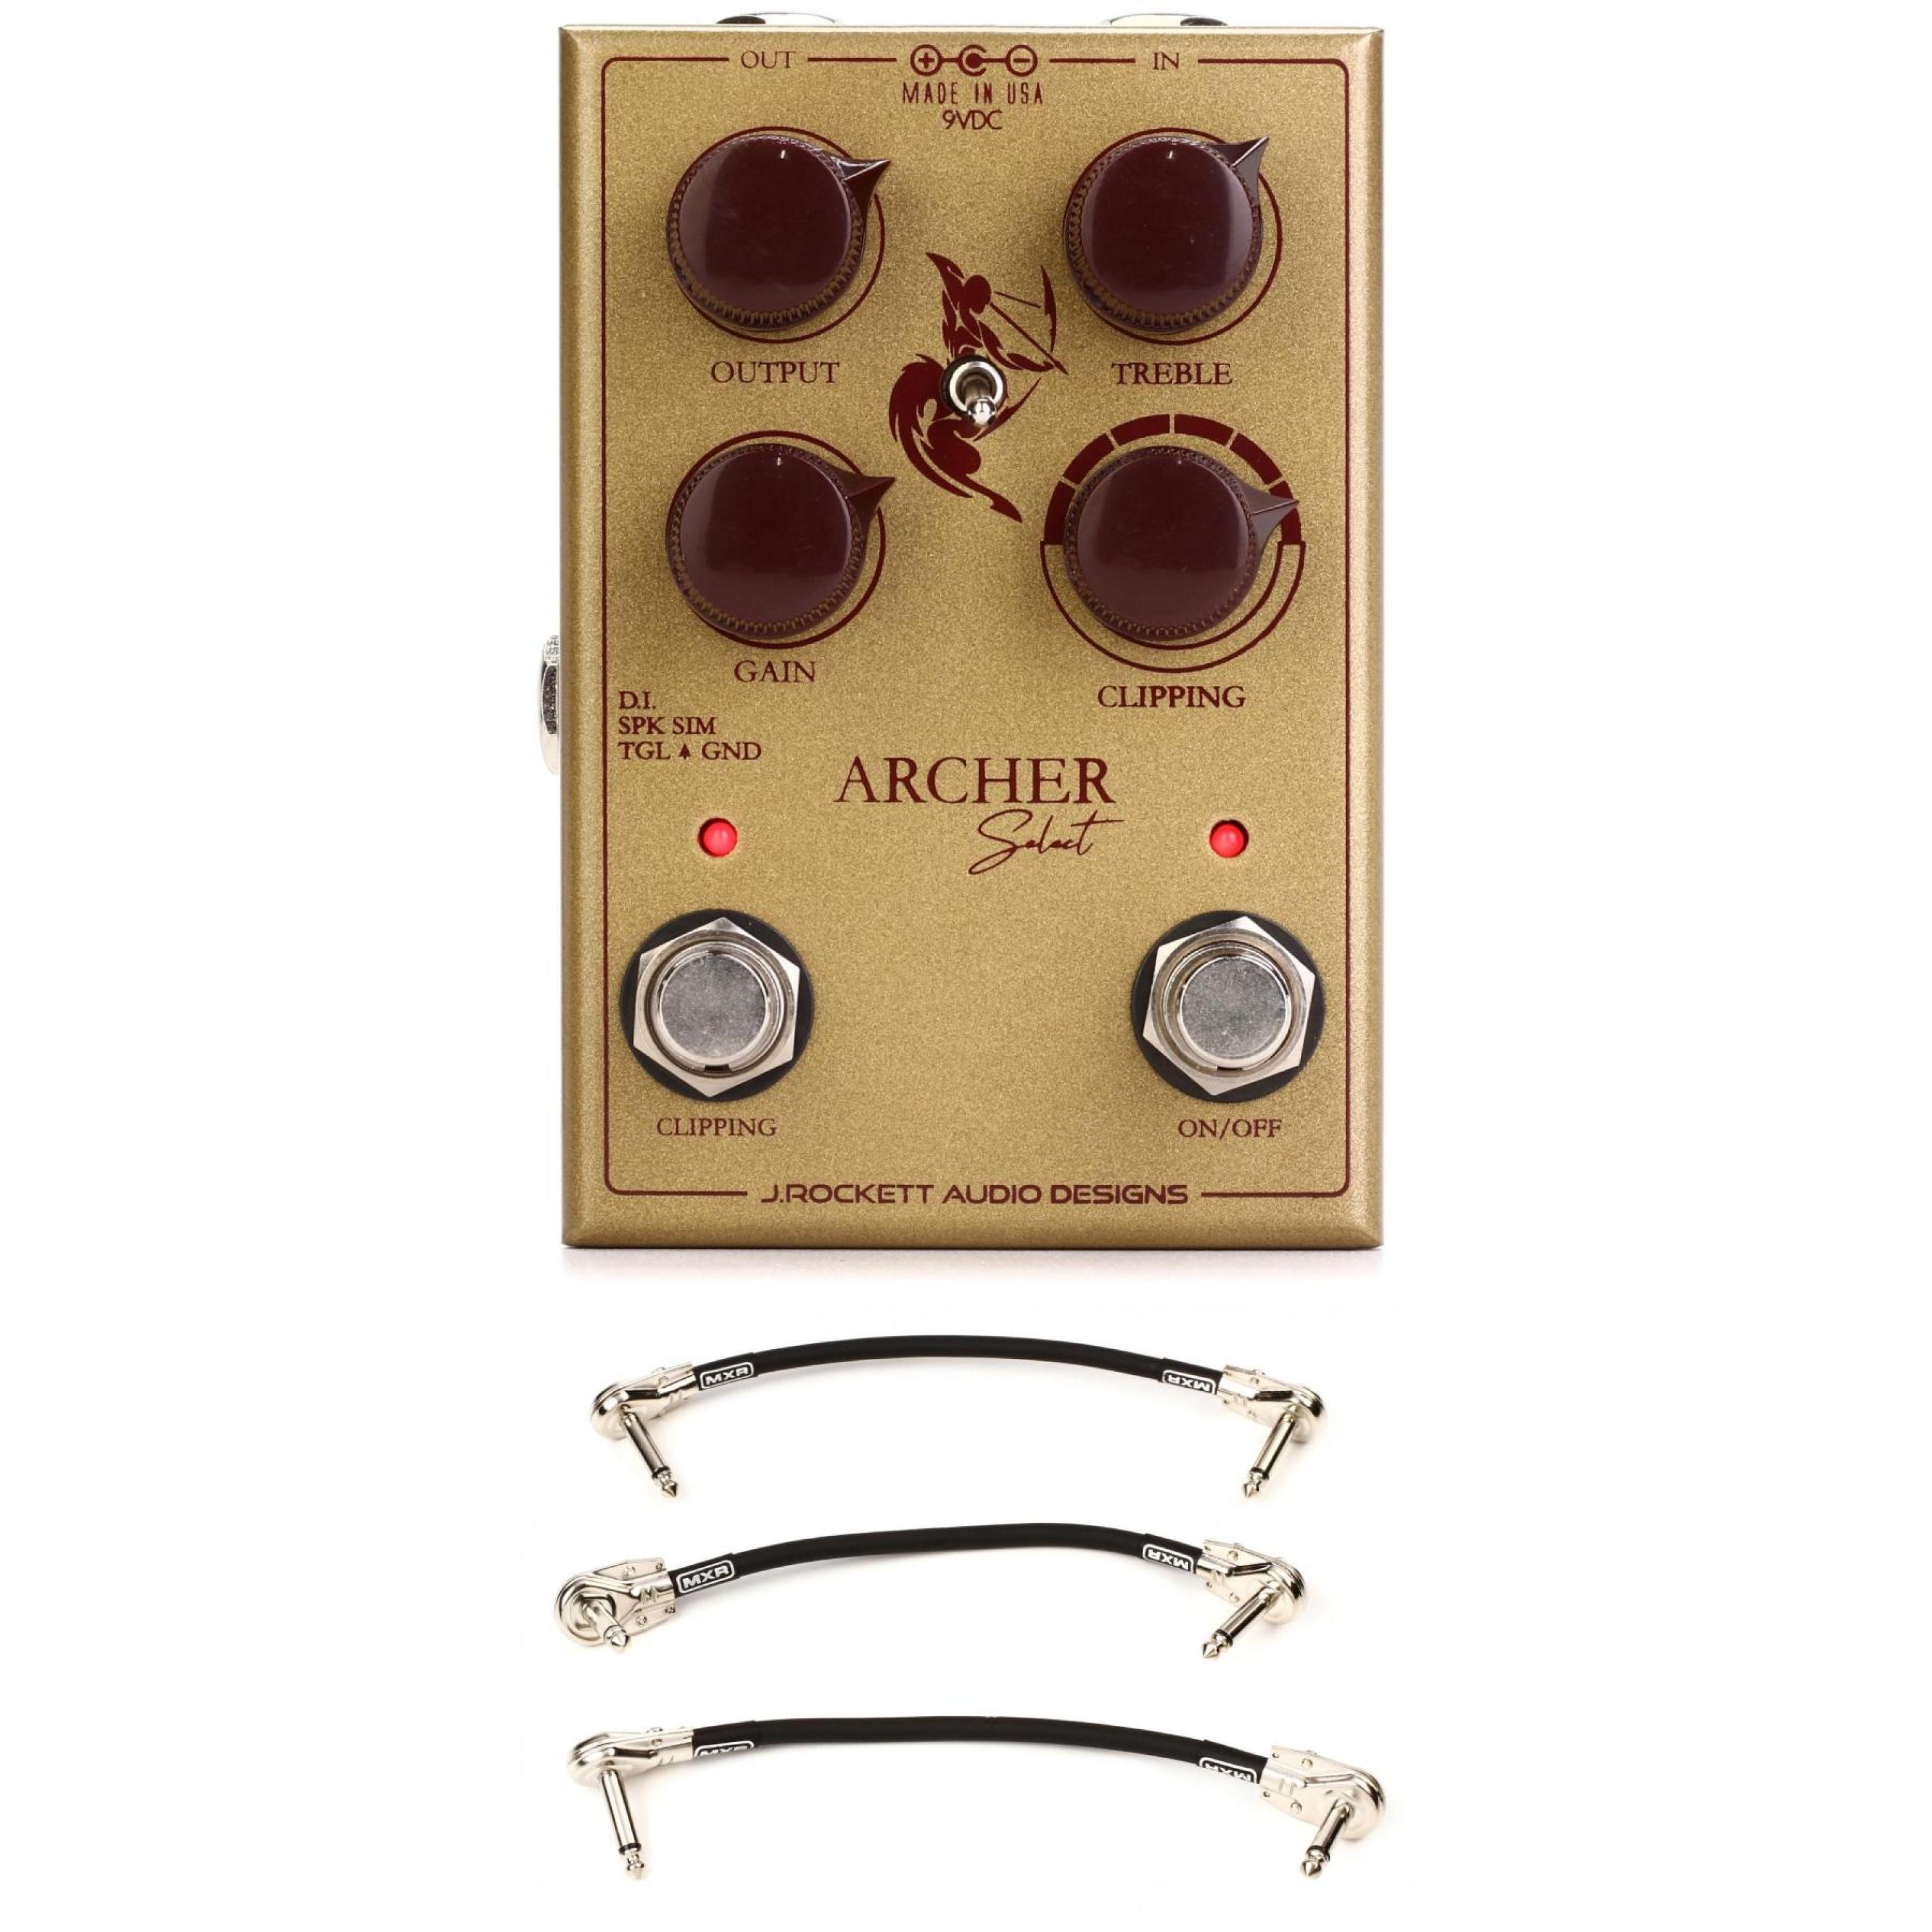 J. Rockett Audio Designs Archer Select Boost/Overdrive Pedal with 3 Patch  Cables